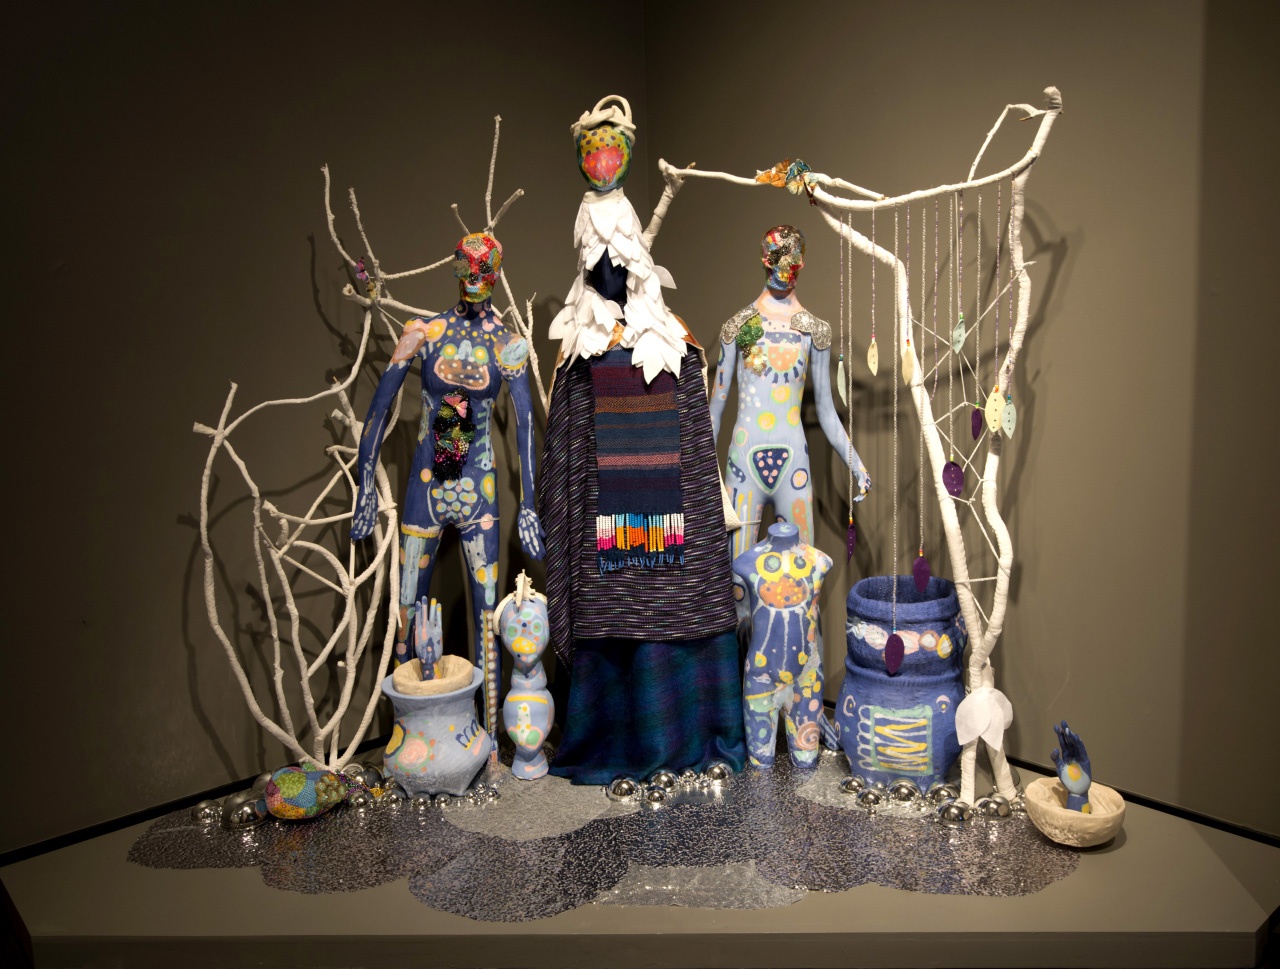 Two, abstractly painted, humanoid sculptures flank another humanoid sculpture wearing multiple, woven blankets and a hood of white petals surrounded by decorative clay vessels and woven tree branches.